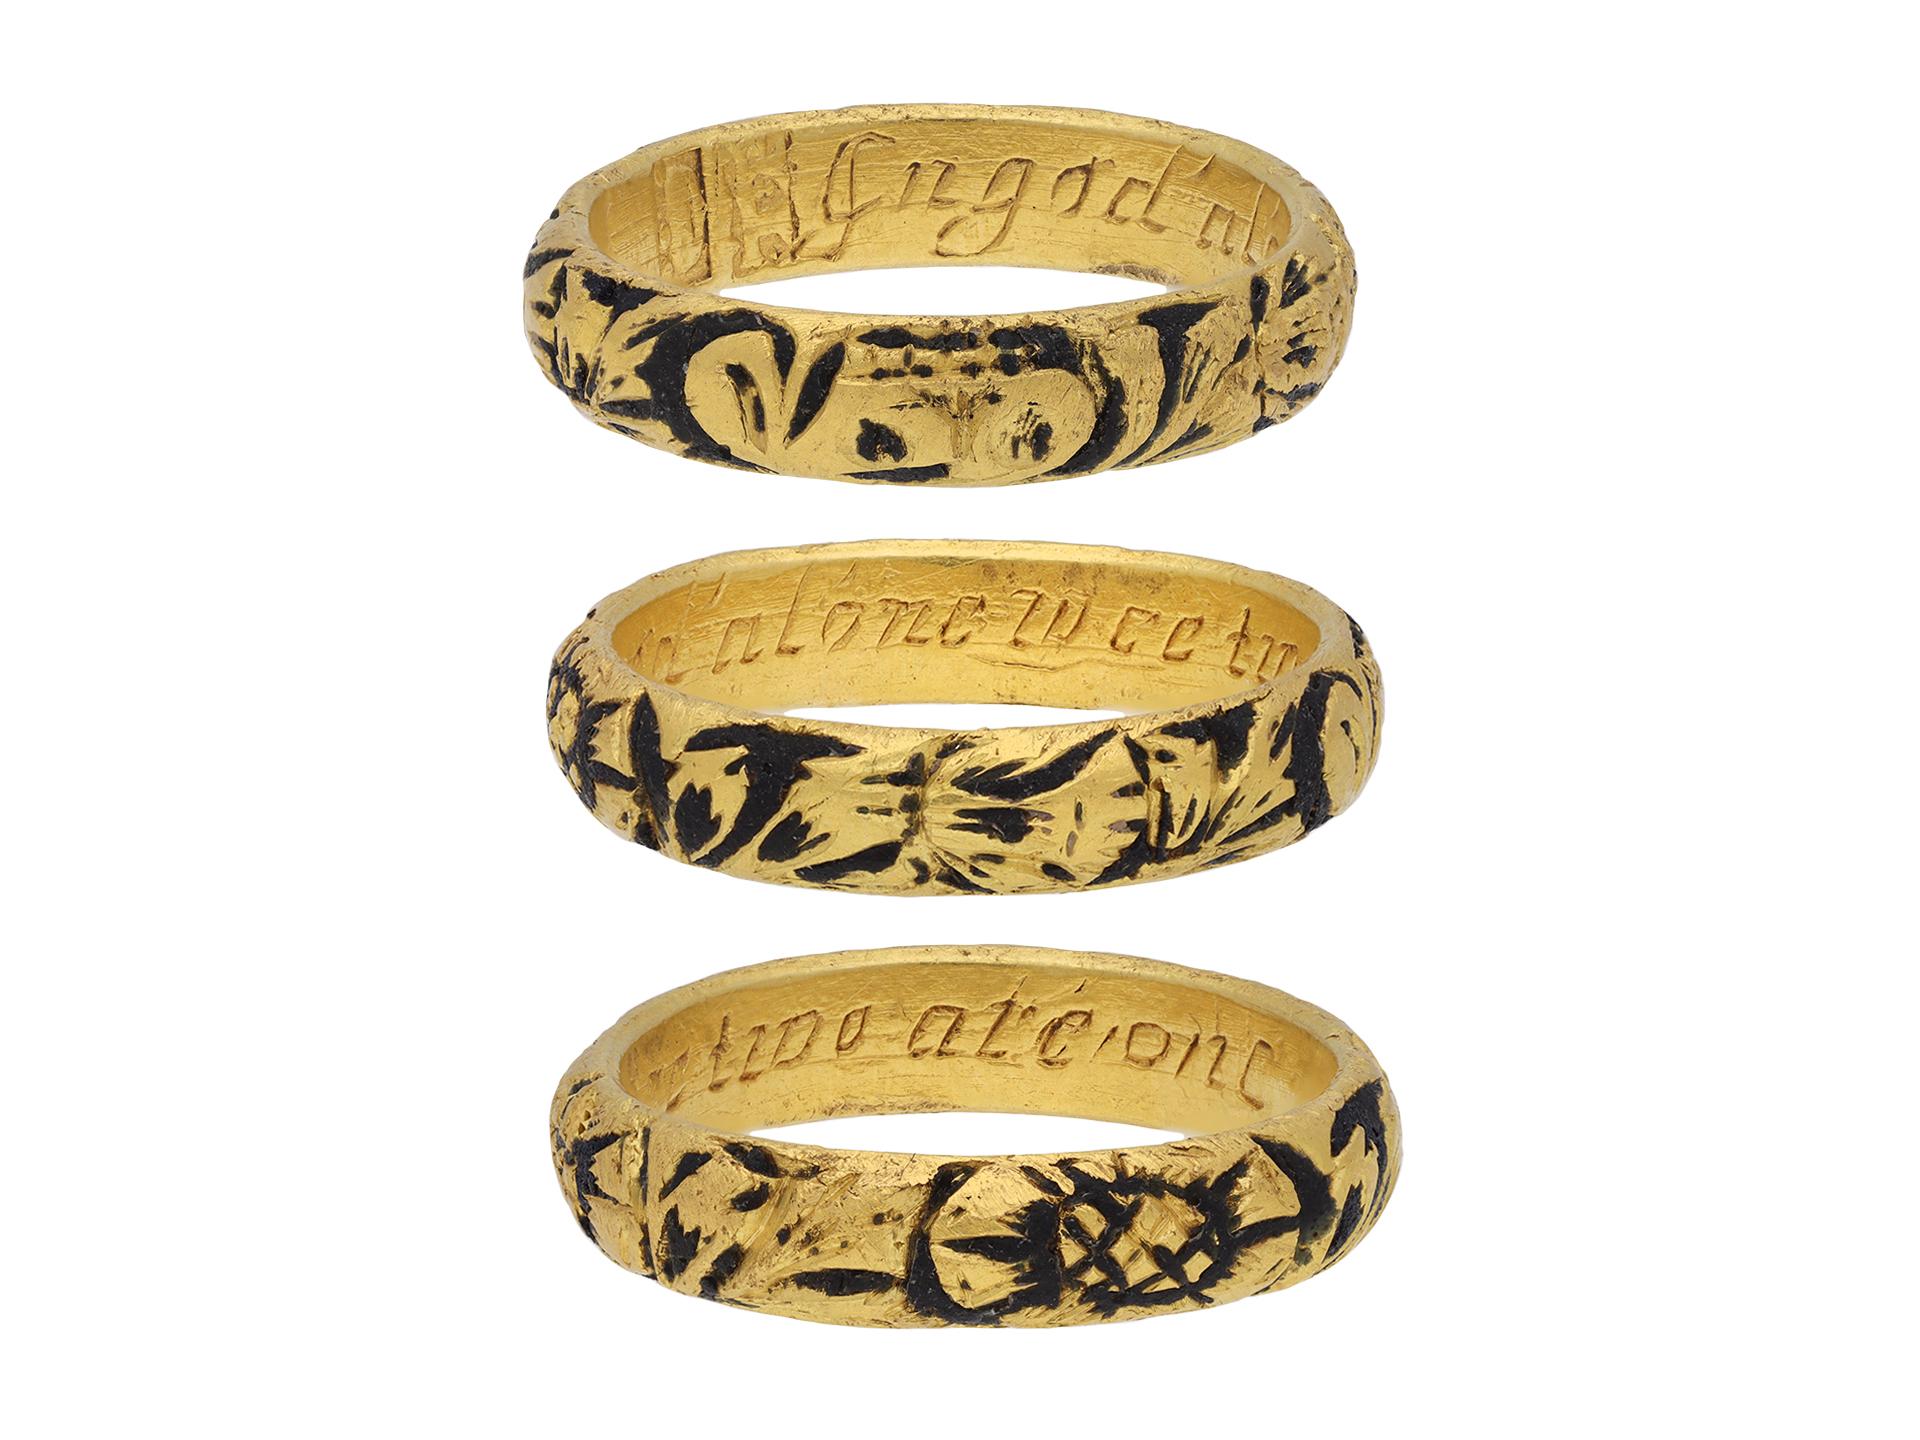 Post Medieval memento mori ring, 'in god alone we too are one' circa 18th c In Good Condition For Sale In London, GB